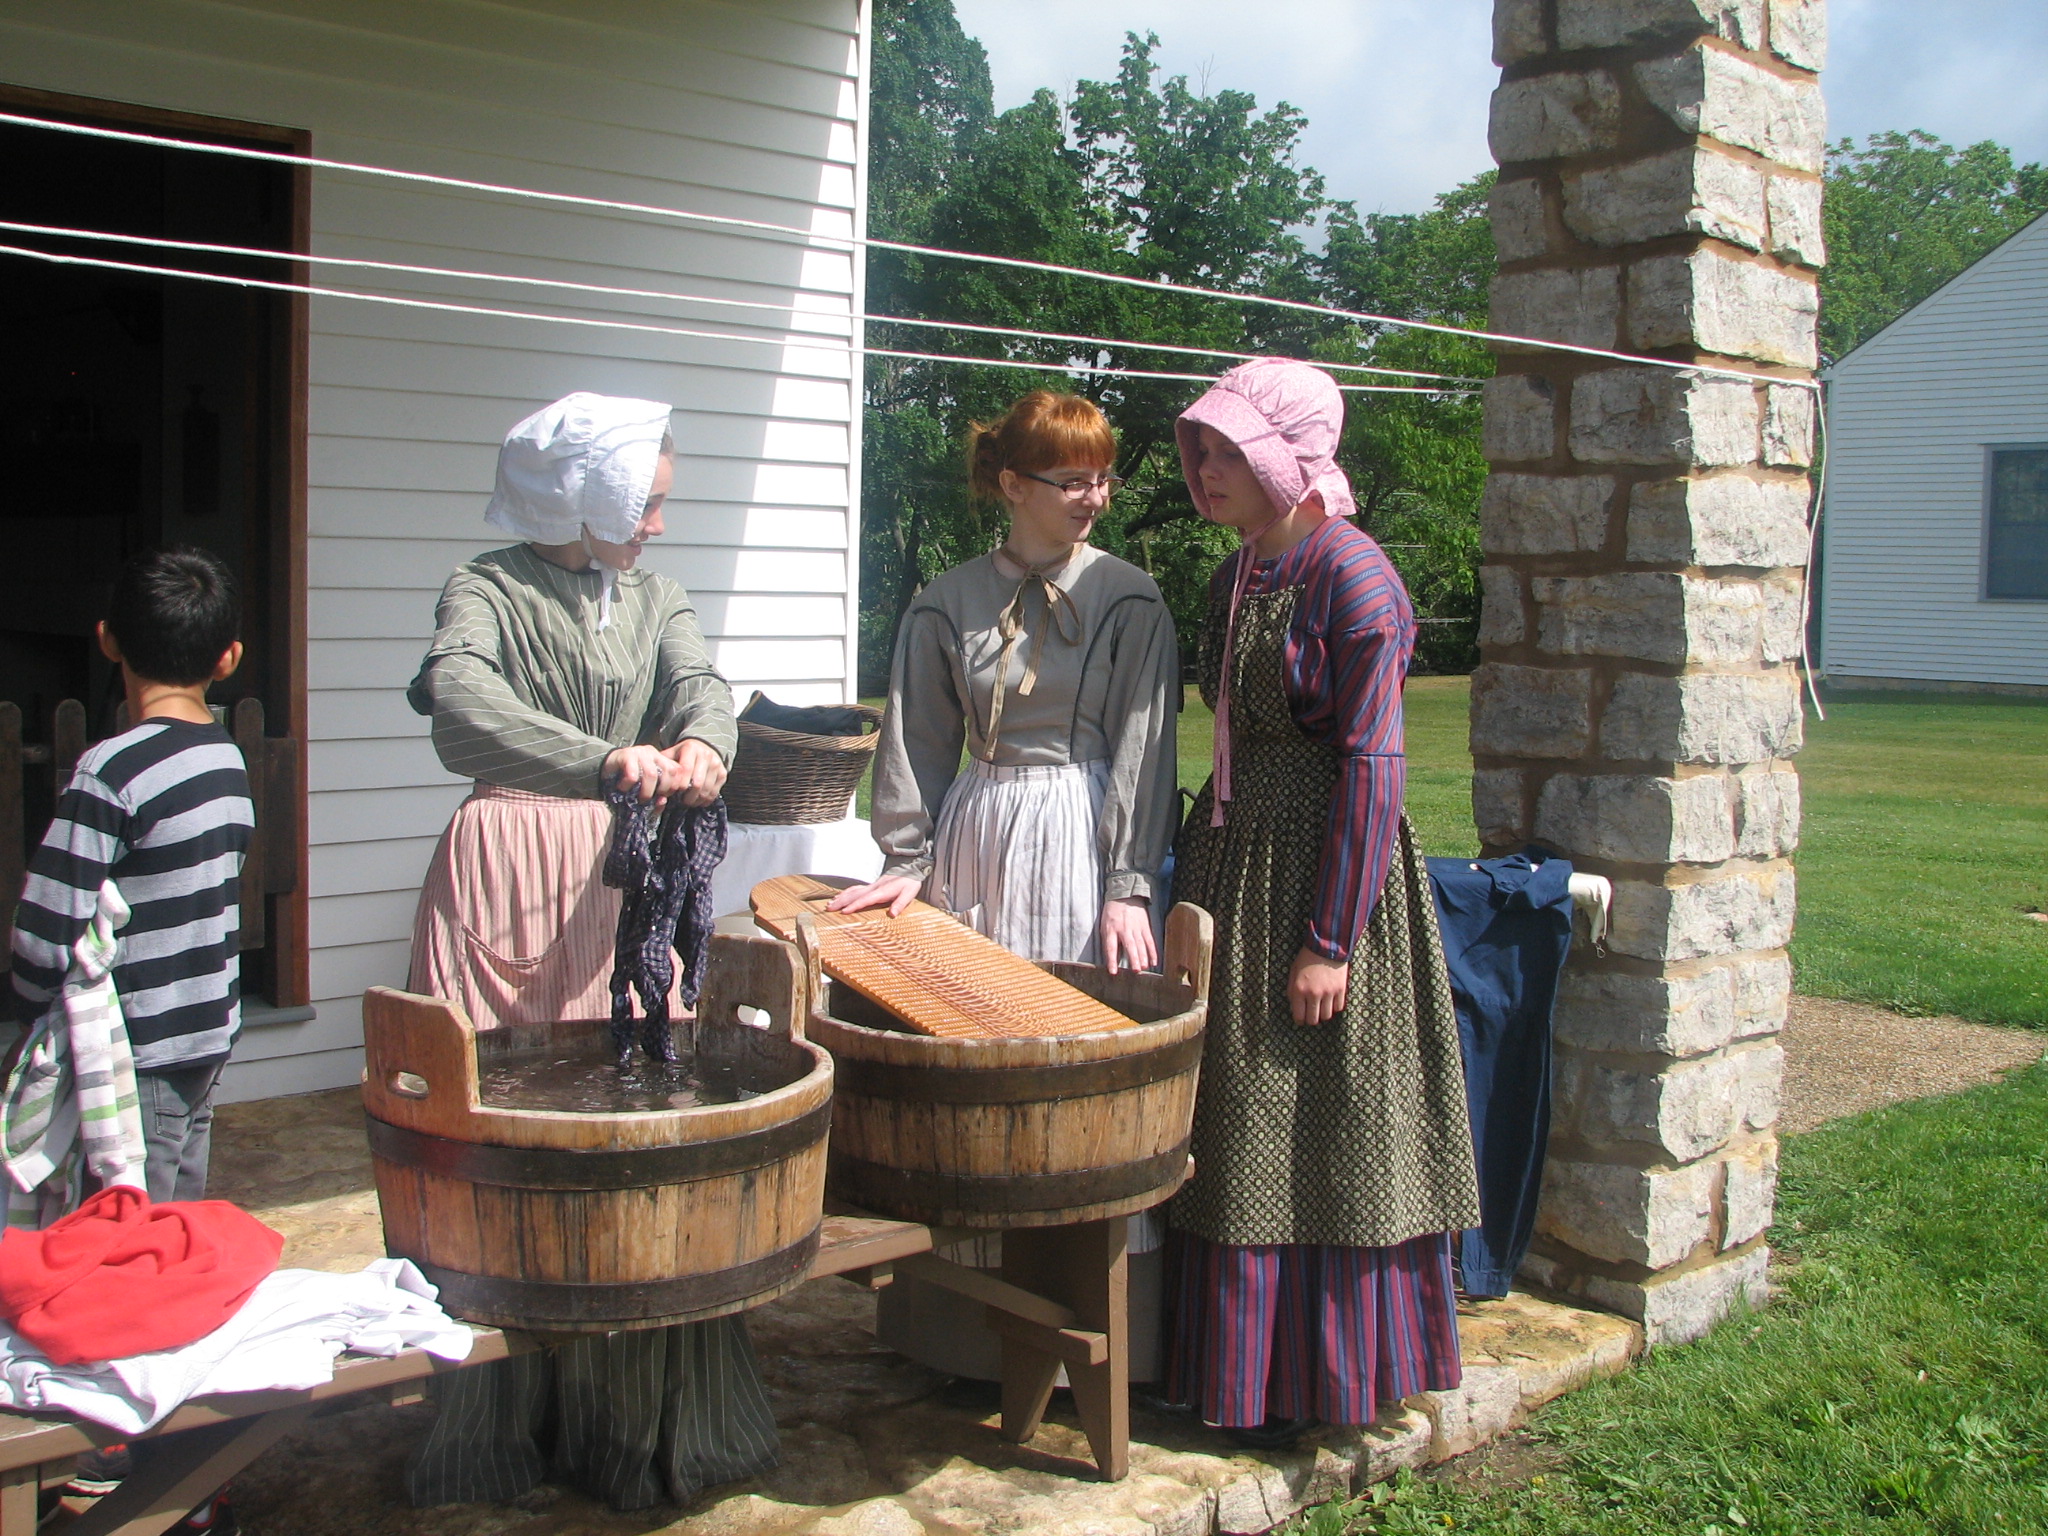 Women dressed as laundresses with laundry buckets and scrub boards